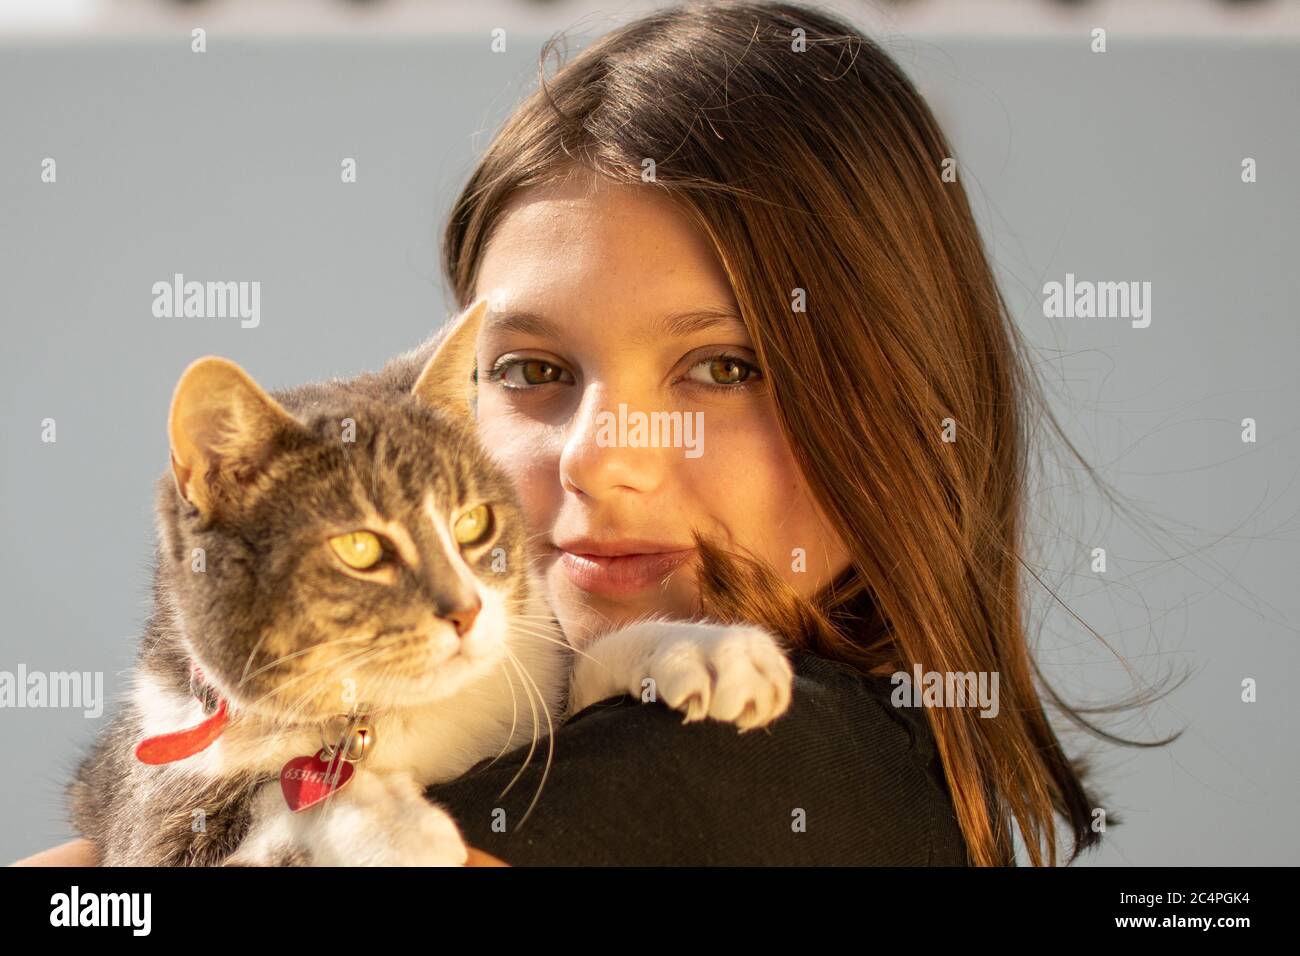 Young smiling girl catching her cat Stock Photo